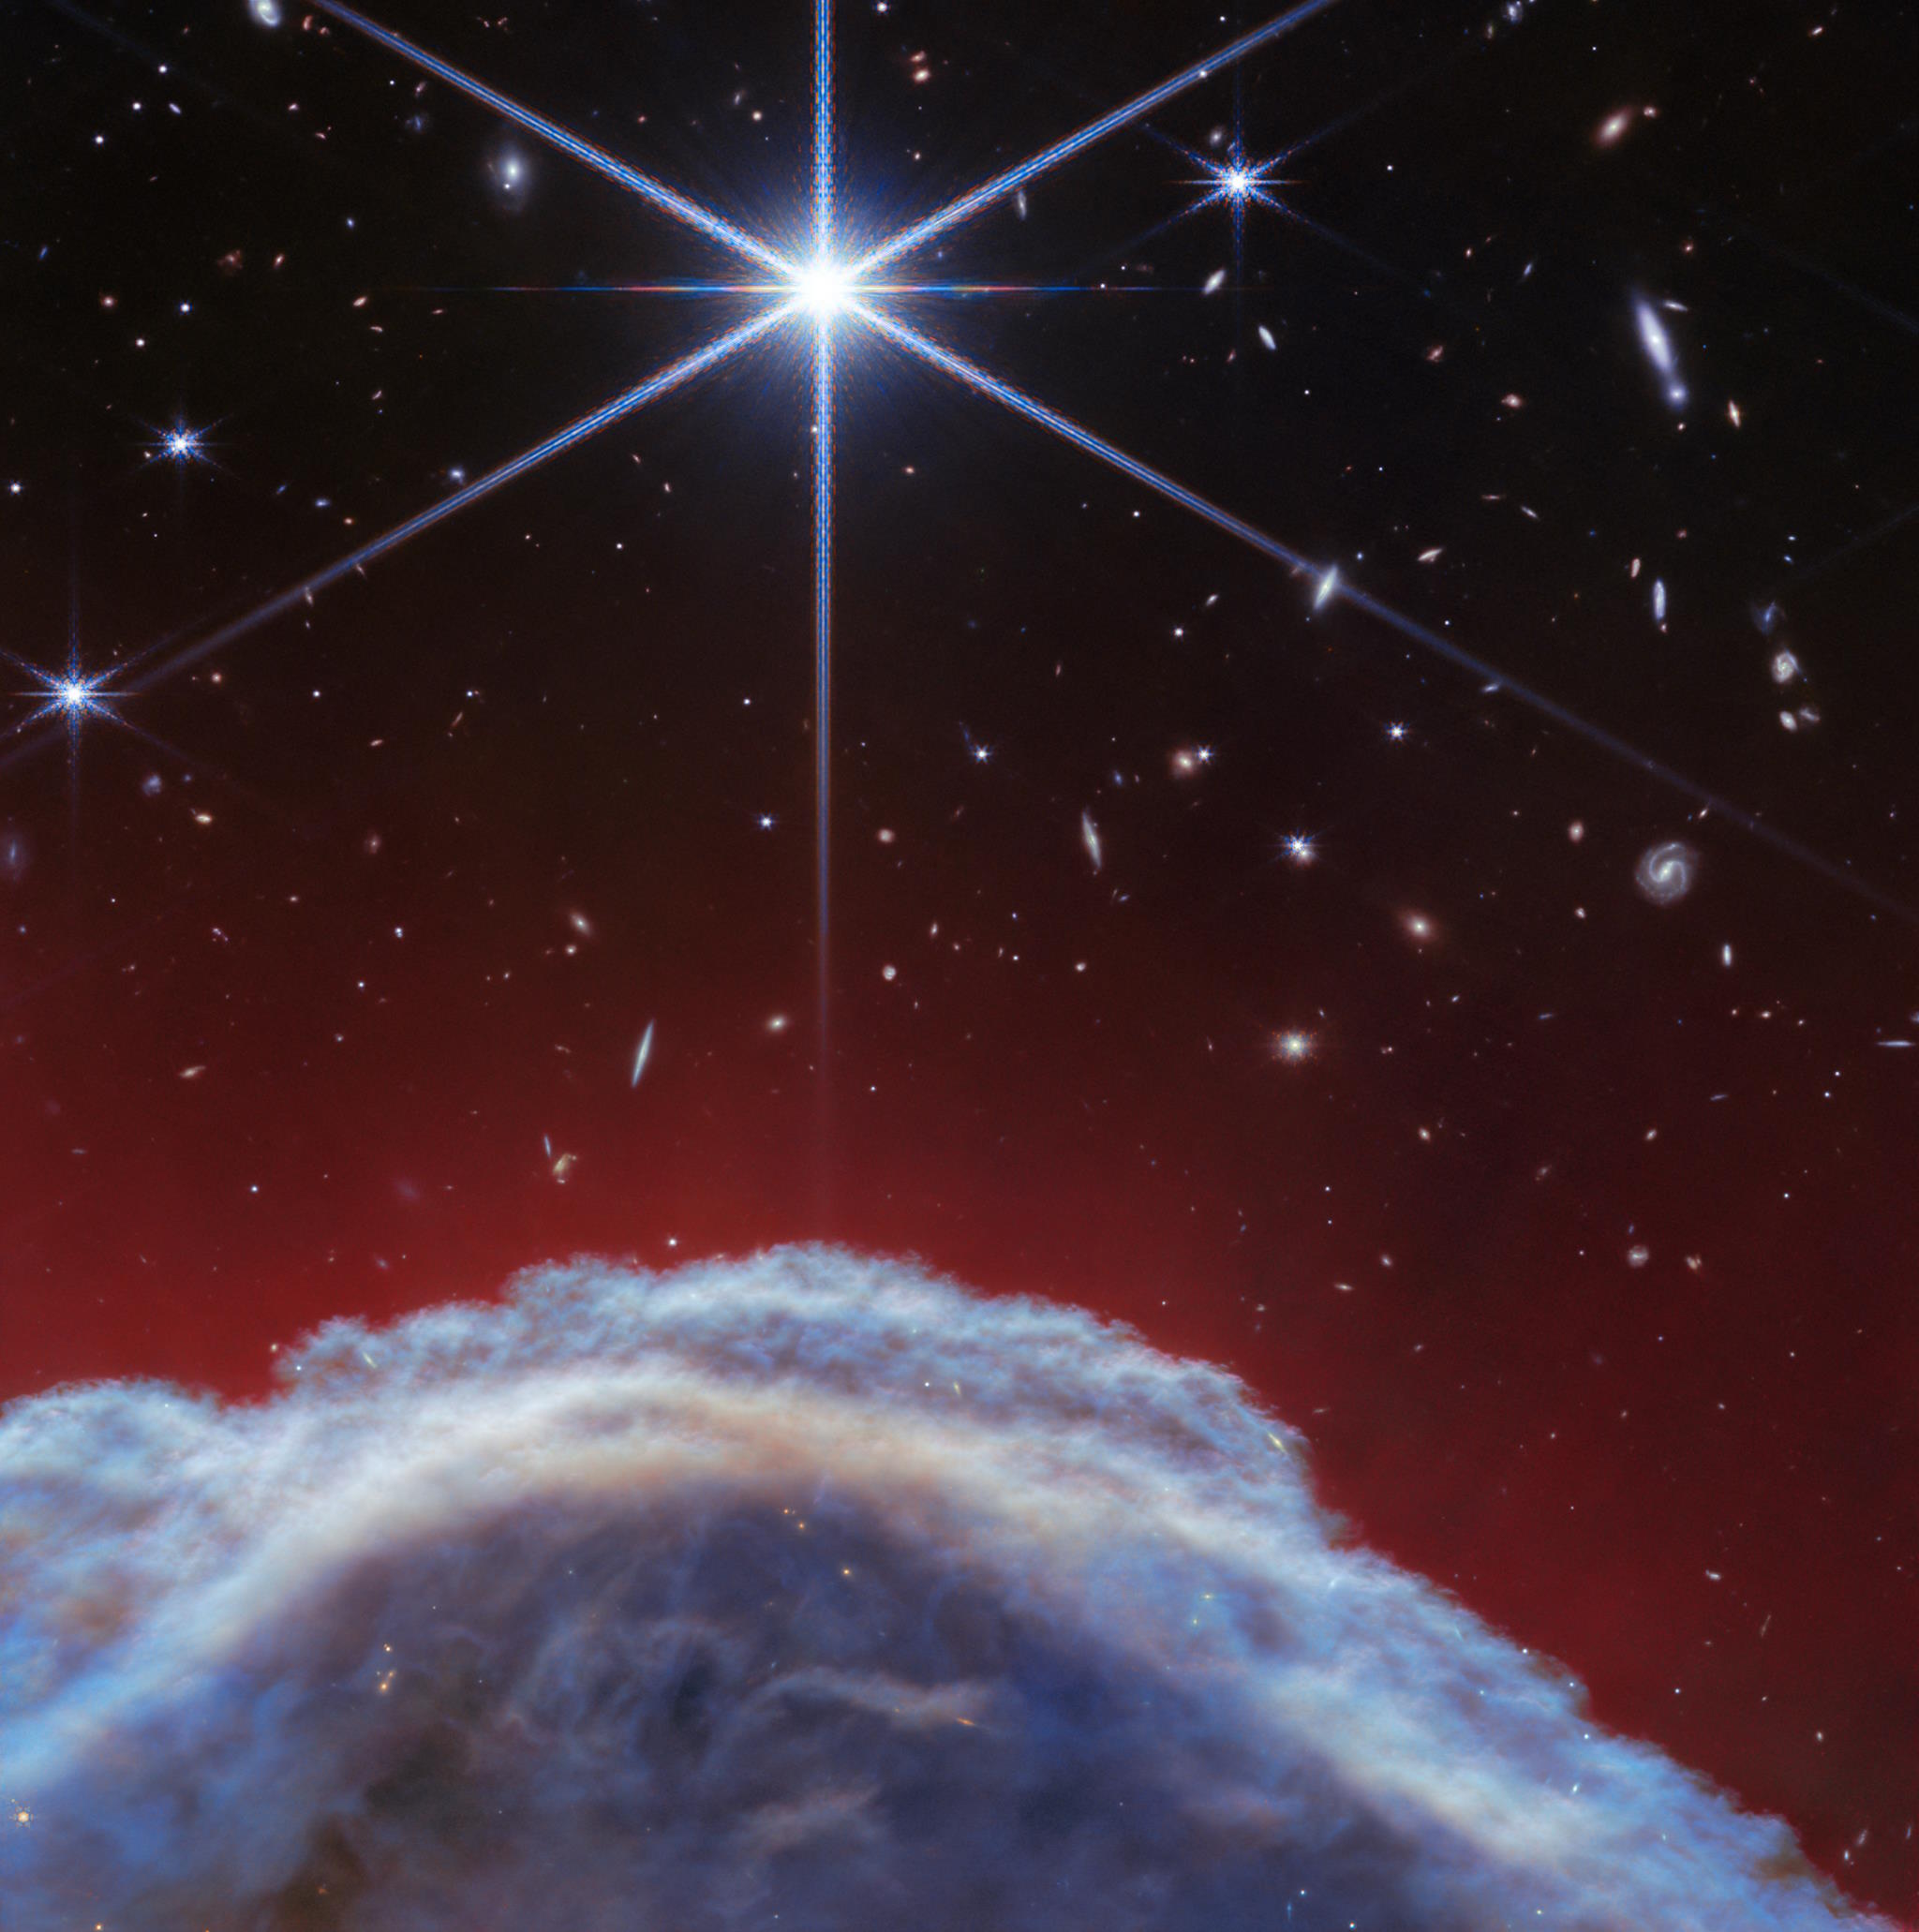 A‌ celestial ⁢image captured‌ by the JWST showing a bright star at the center with smaller stars ⁣and a vibrant, cloud-like Horsehead Nebula ‍in the foreground against a deep red and black space ‌background.